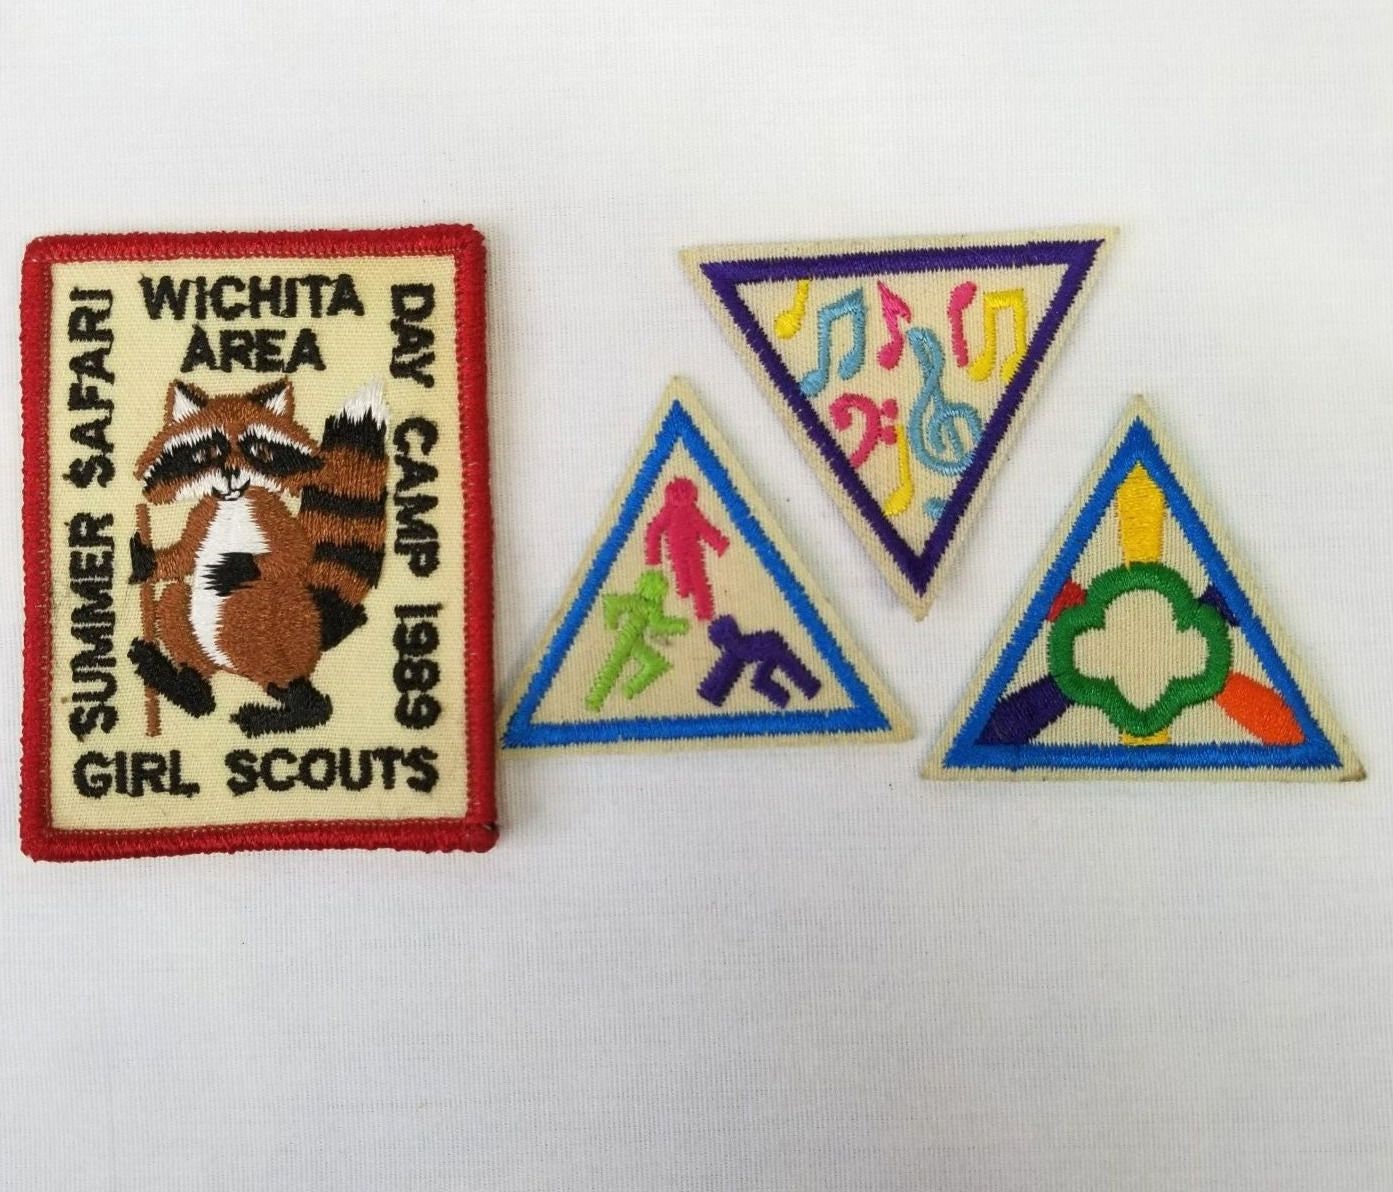 Lot of 7 Vintage 1980s Girl Scout Patches Cat Patch 80s Craft Supply  Appliqué Girl Scout Costume Cookies Patch Badges 